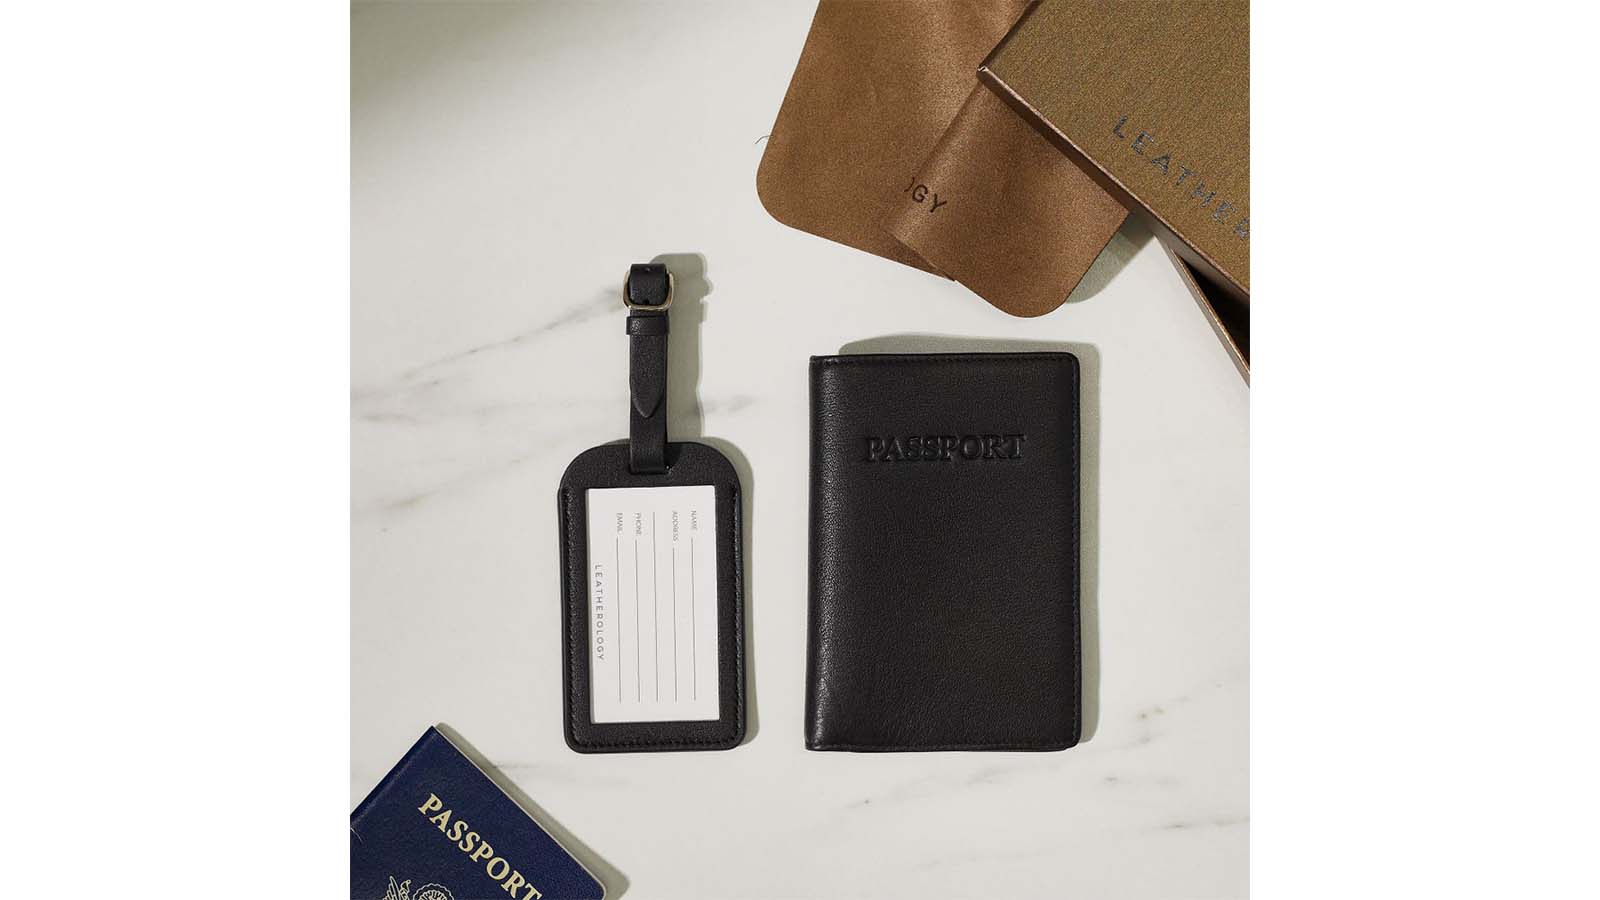 Passport Cover & Luggage Tag Faux Leather Travel Accessories 